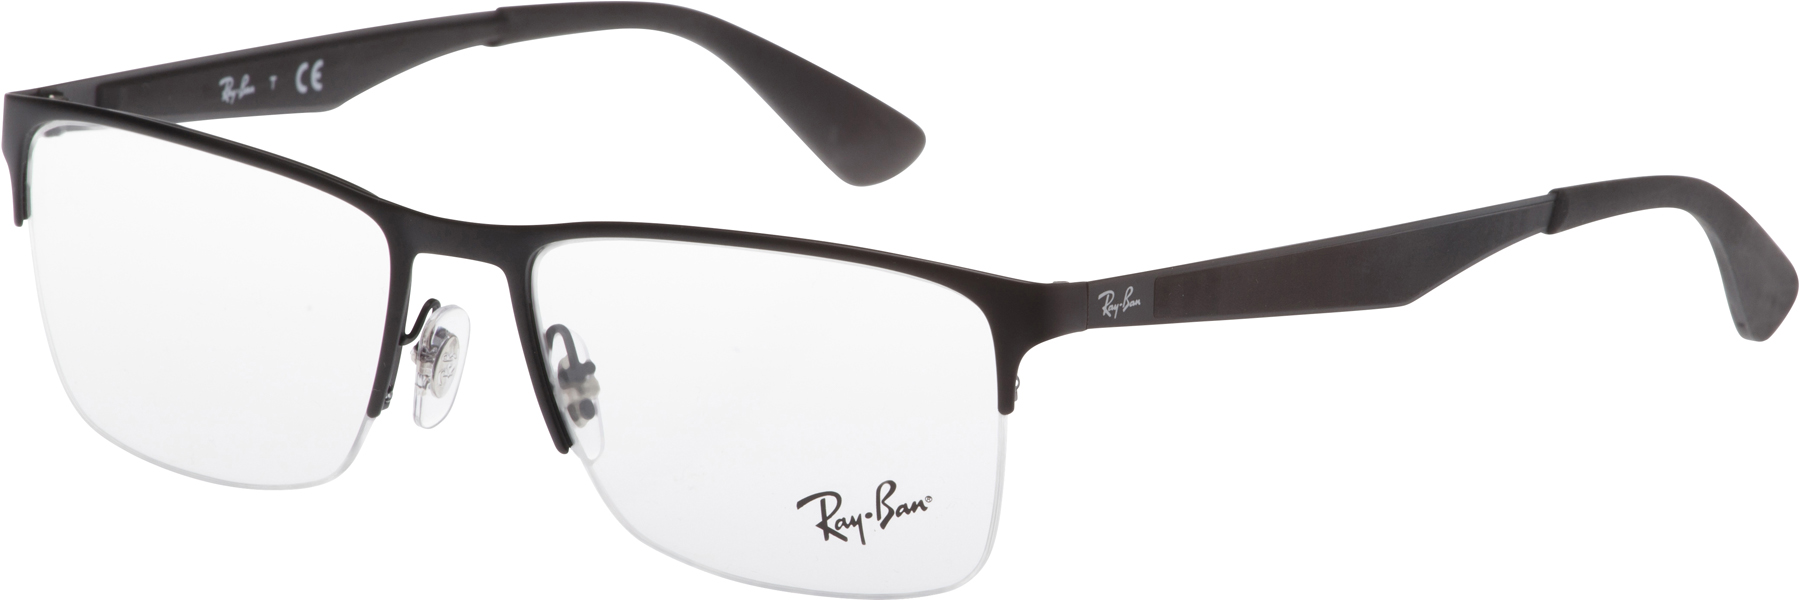 Ray-Ban 6335 image number null